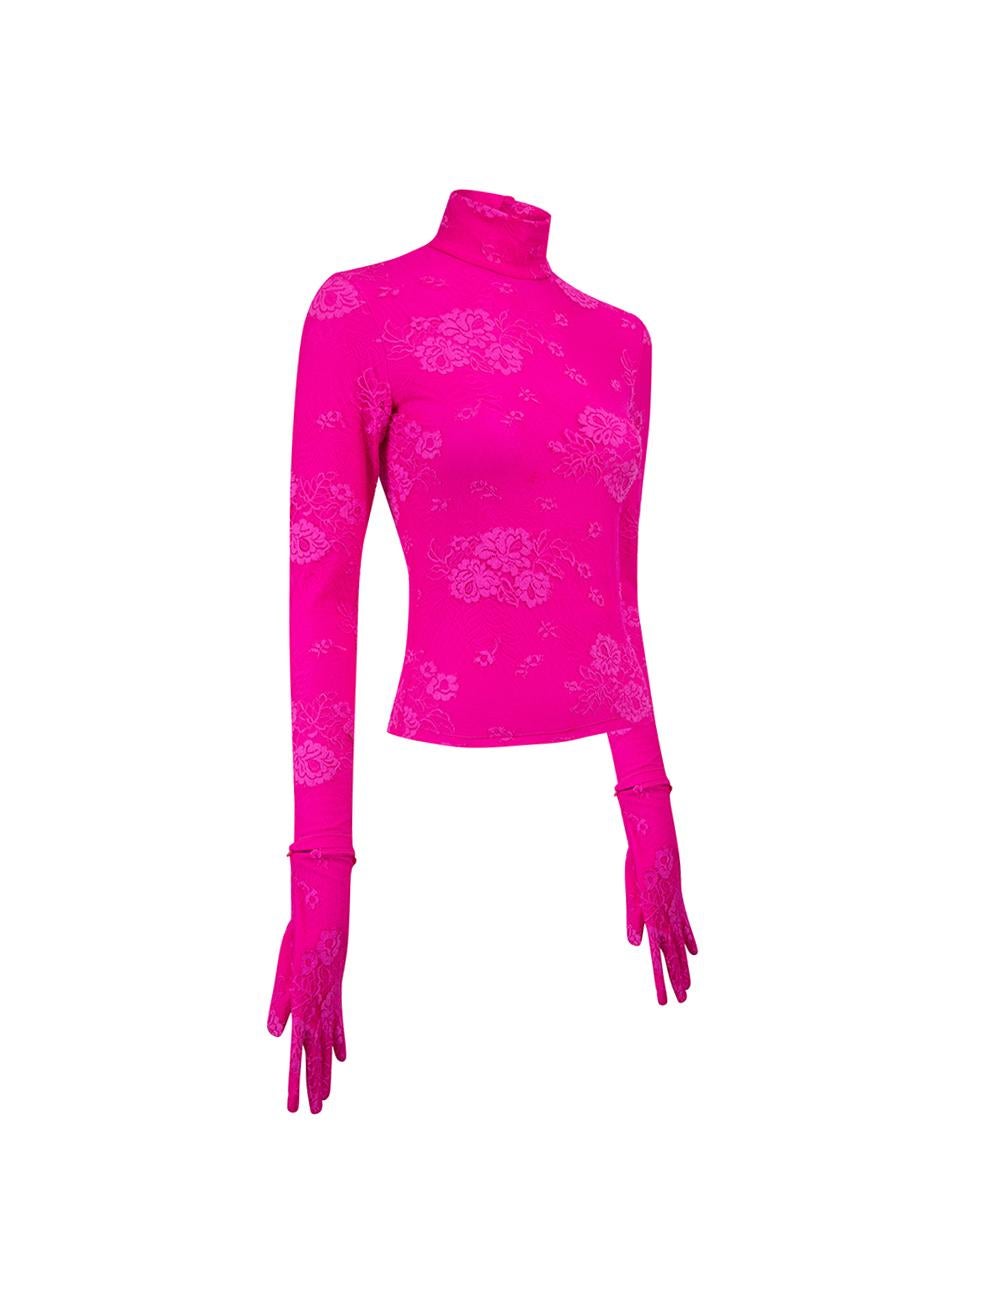 CONDITION is Very good. Minimal wear to top is evident. Minimal loose threads along button fastenings and small discoloured mark to the front of this used Balenciaga designer resale item.



Details


Hot pink

Lace

Long sleeves top

Floral